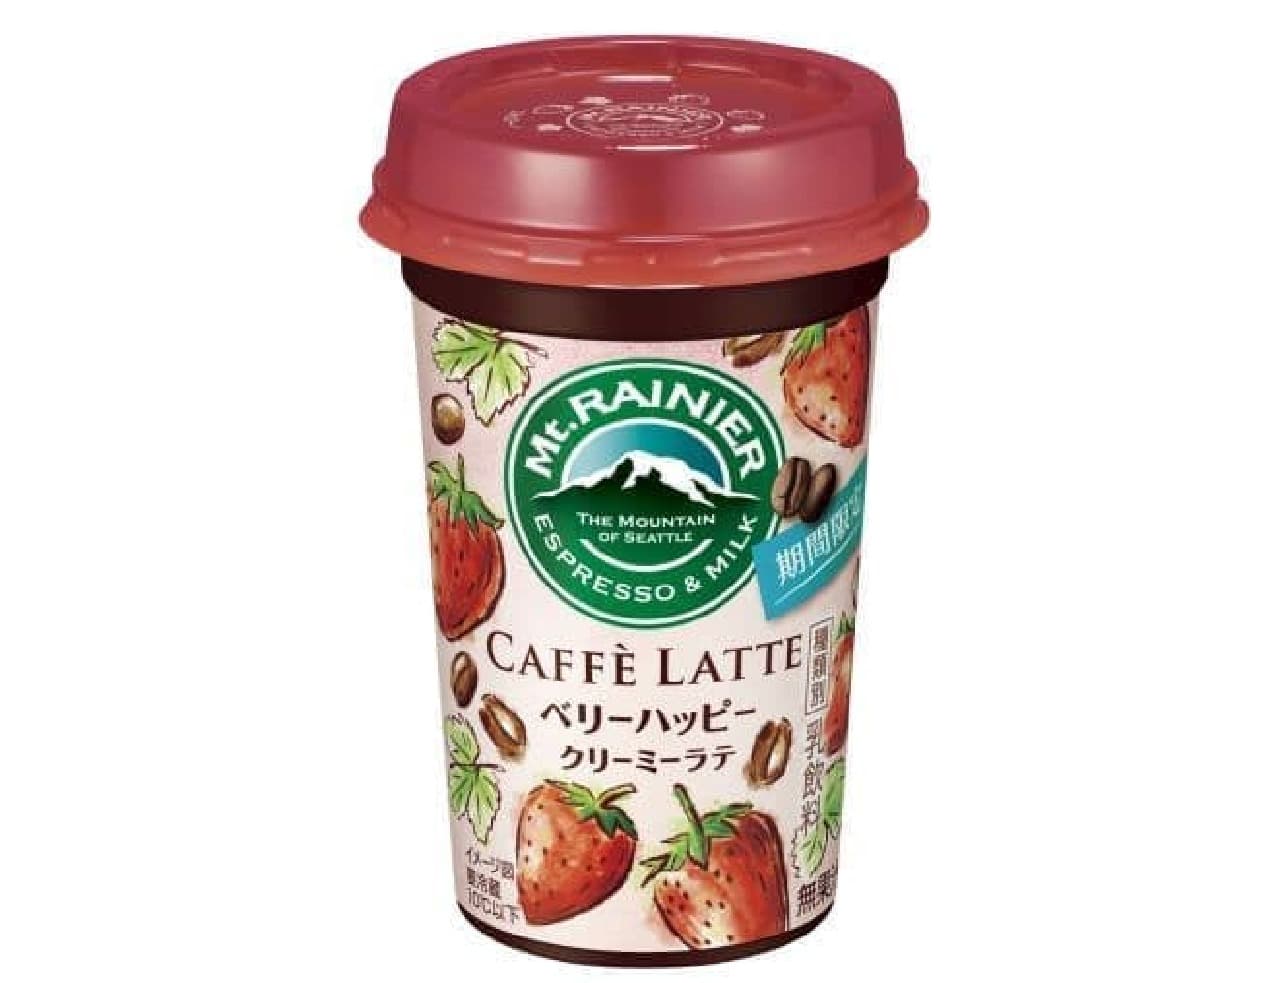 Limited time offer "Mount Rainier Cafe Latte Berry Happy Creamy Latte"